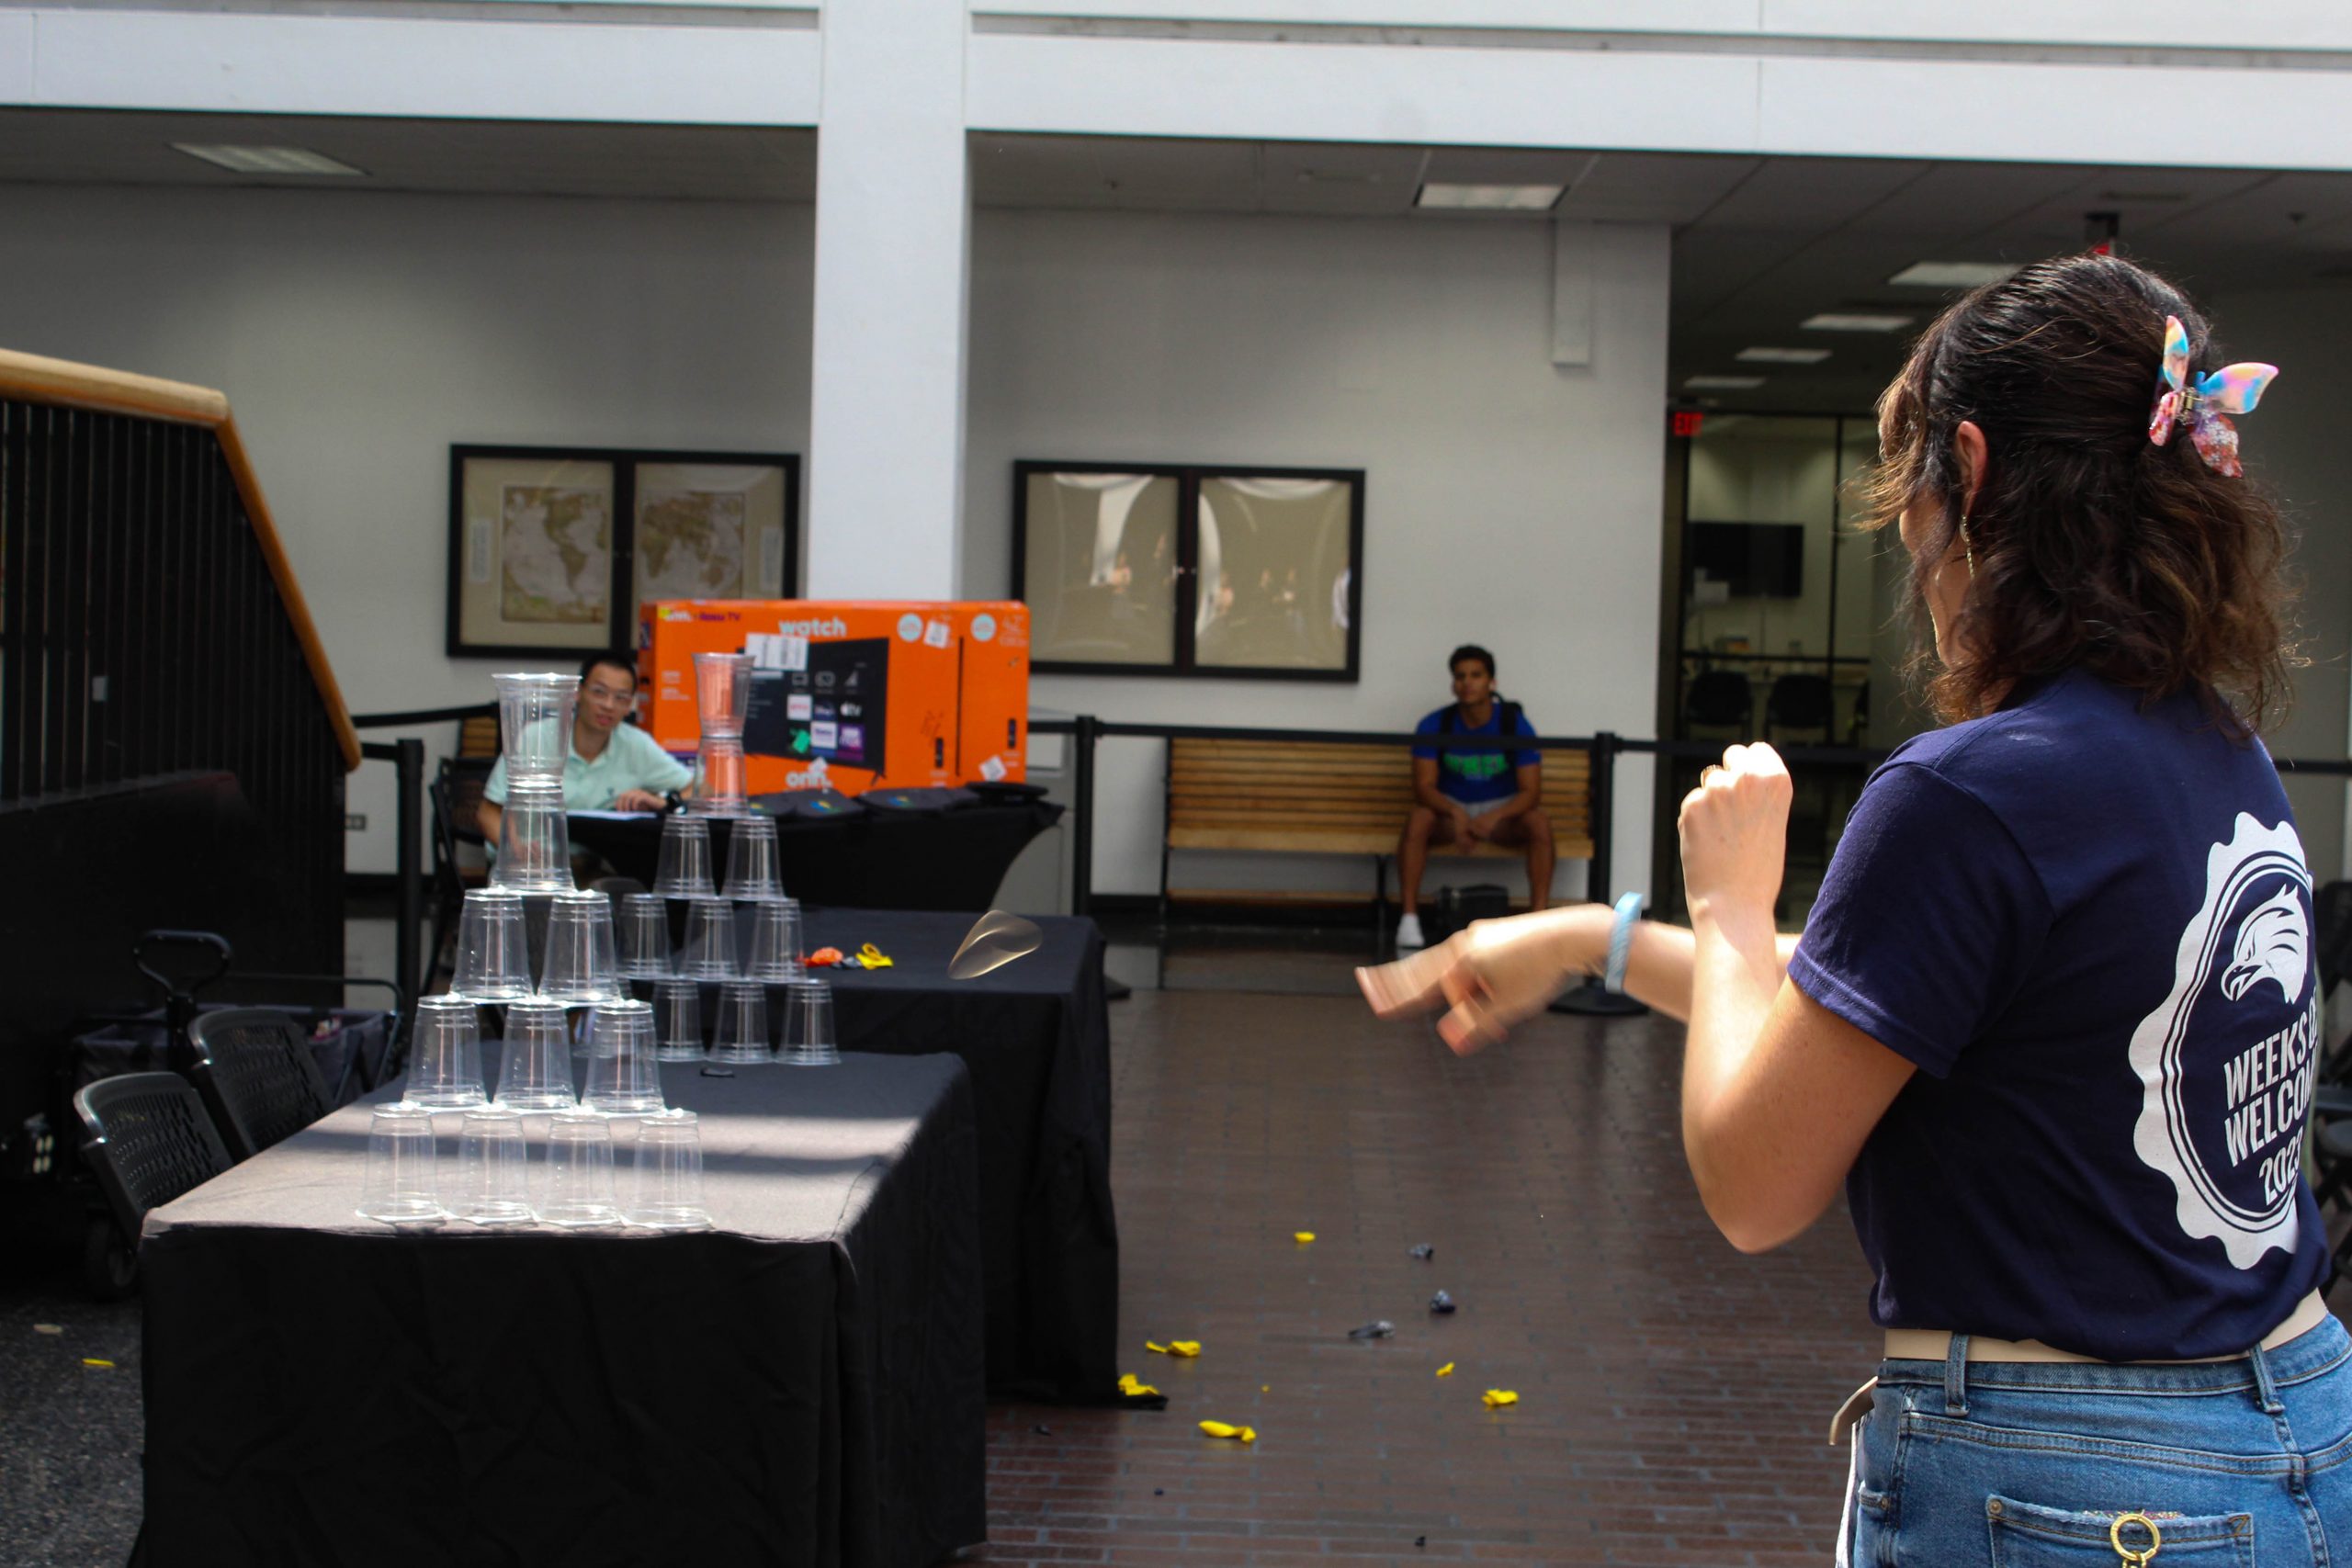 A student shooting rubber bands at a stack of cups.